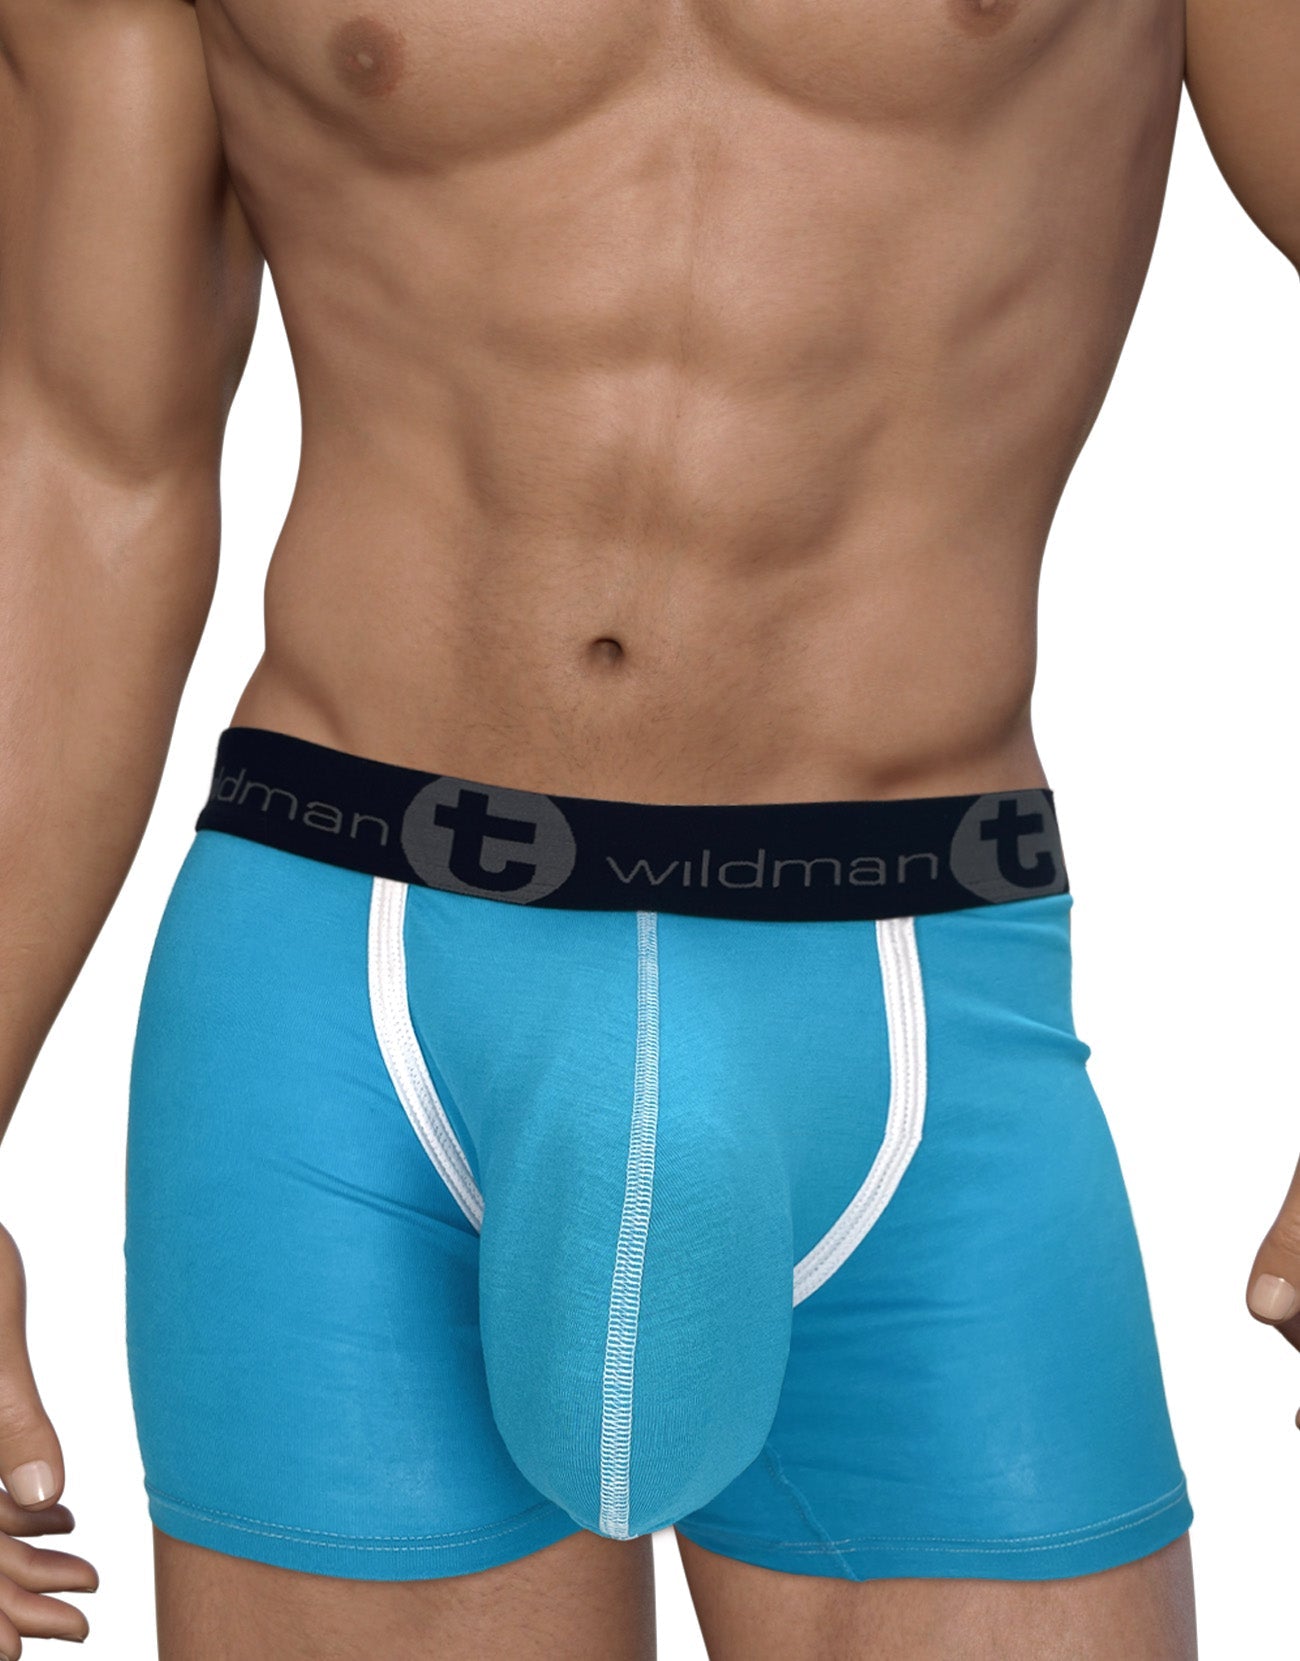 WildmanT Modal Monster Cock 5" Inseam Boxer Brief Baby Blue - DealByEthan.gay